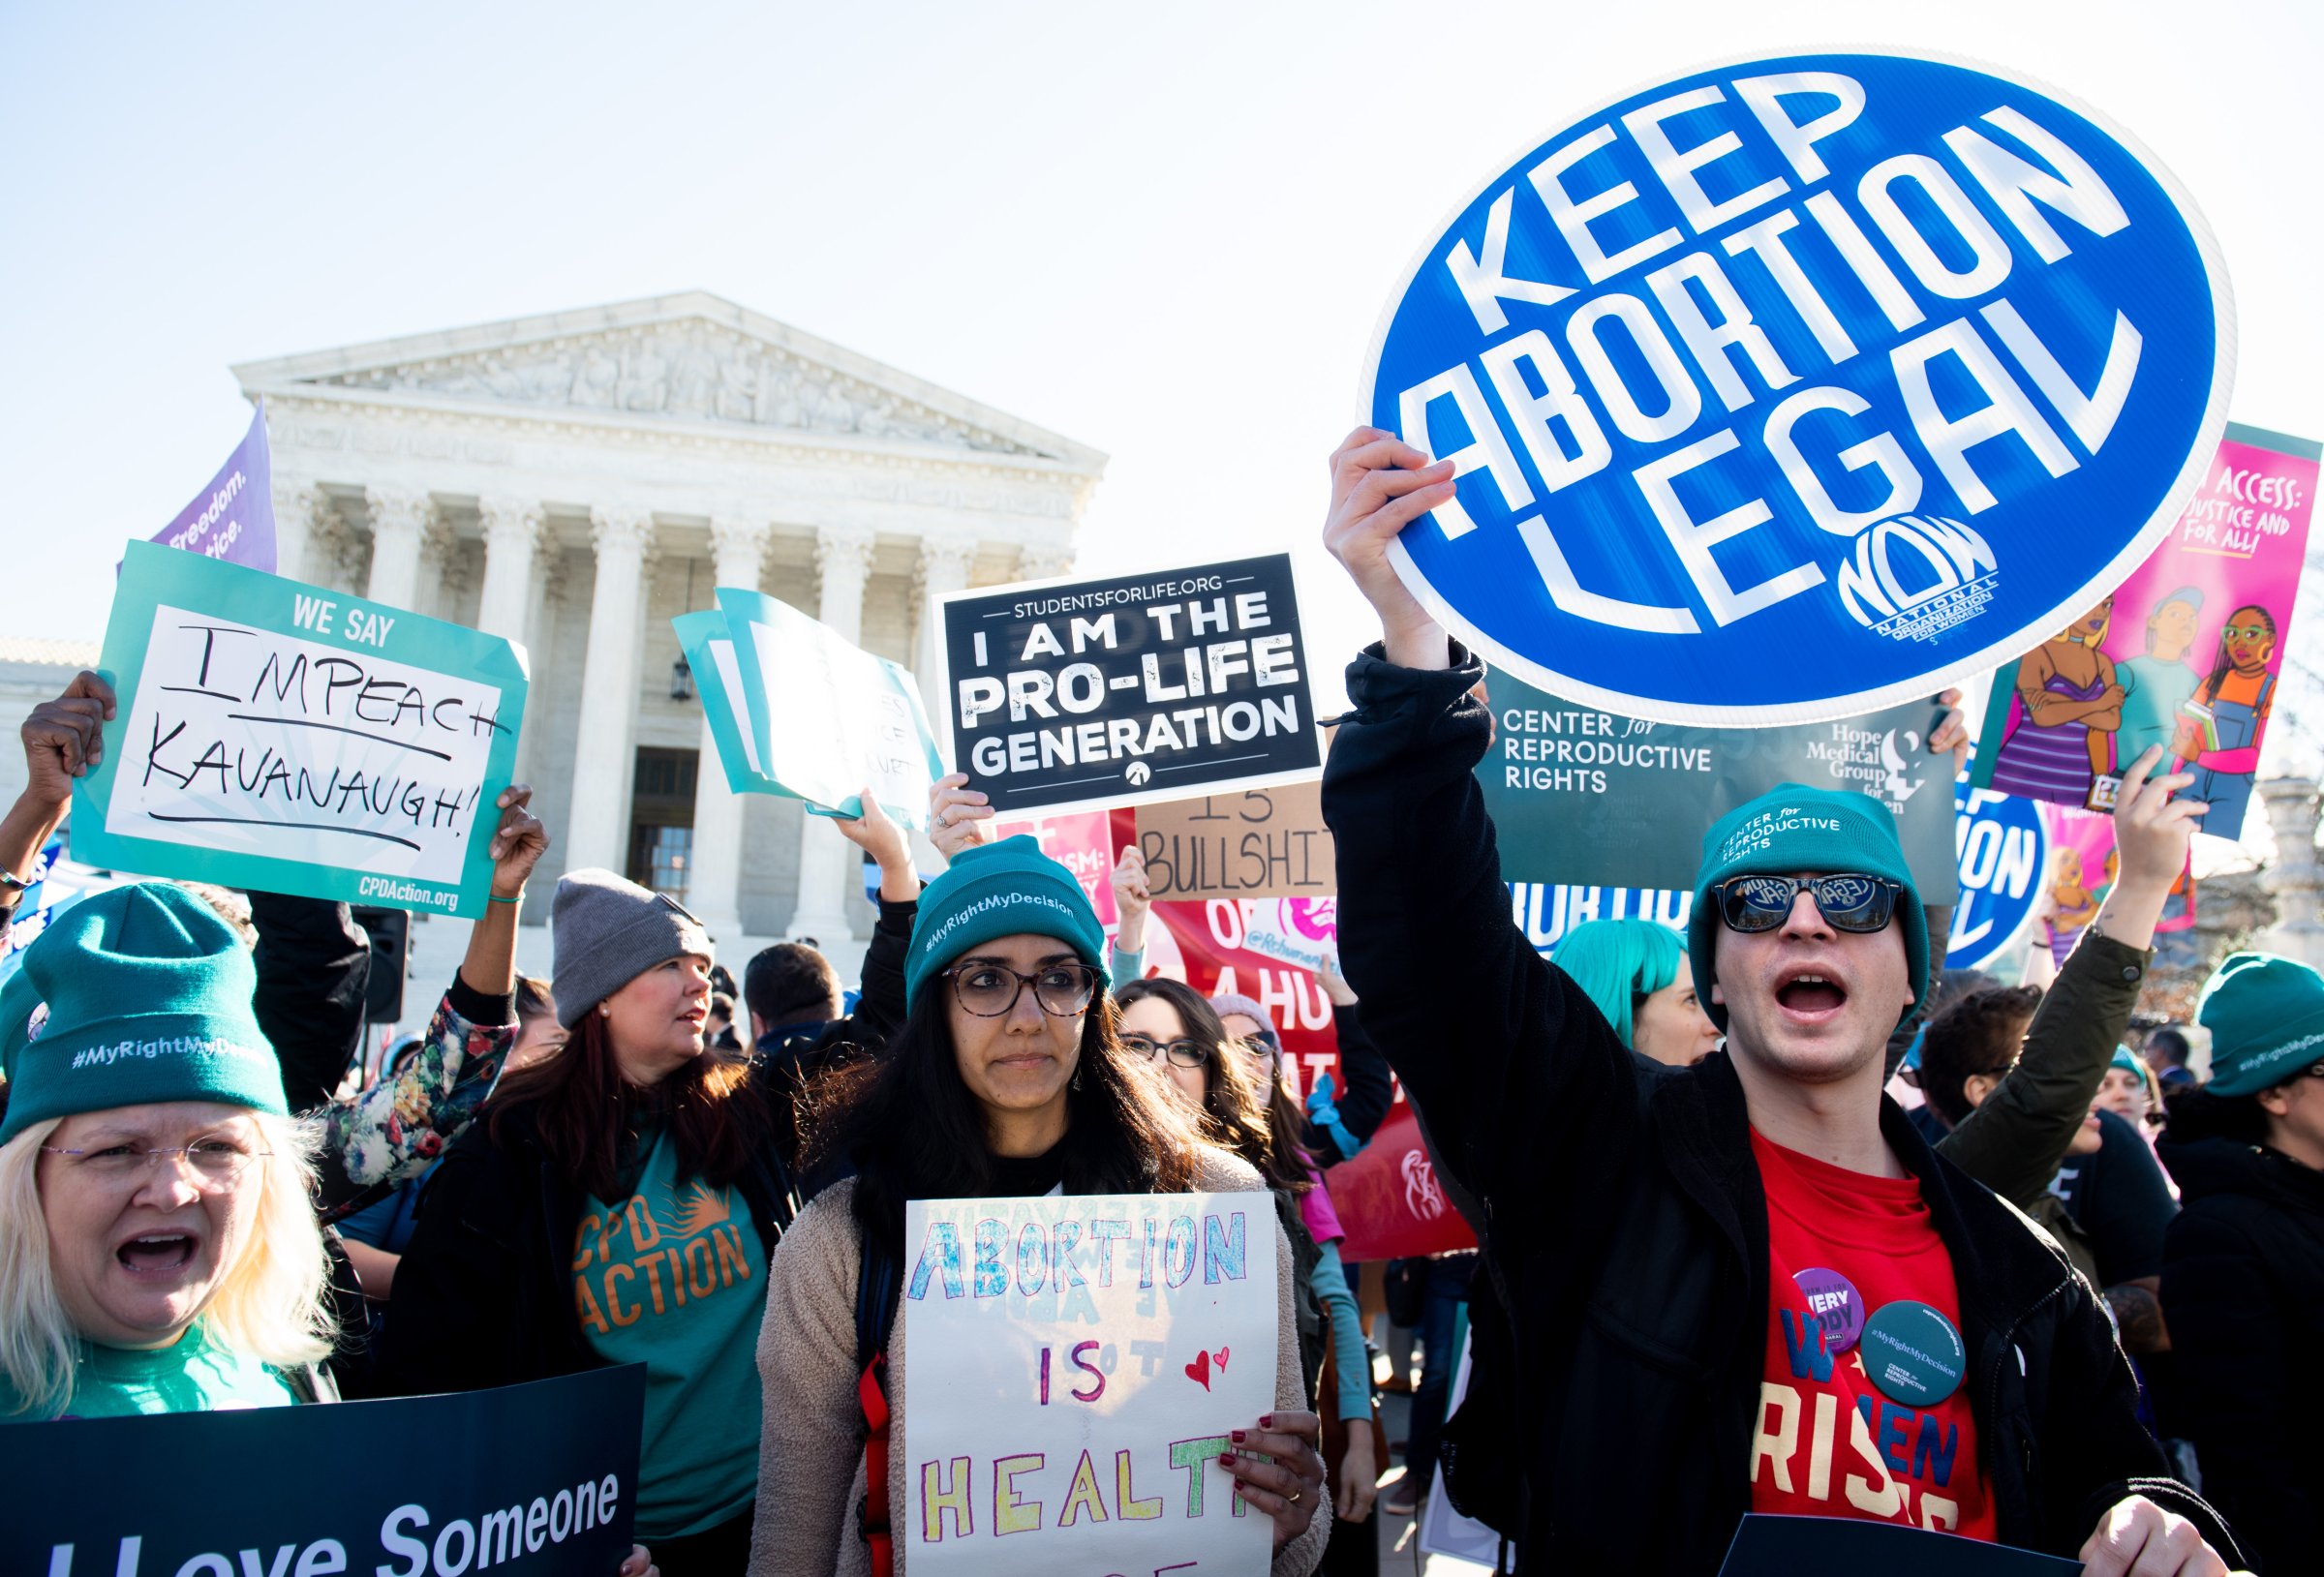 Abortion rights activists and those opposing abortion protest during a demonstration outside the U.S. Supreme Court in Washington, D.C., March 4, 2020, during oral arguments regarding a Louisiana law about abortion access.